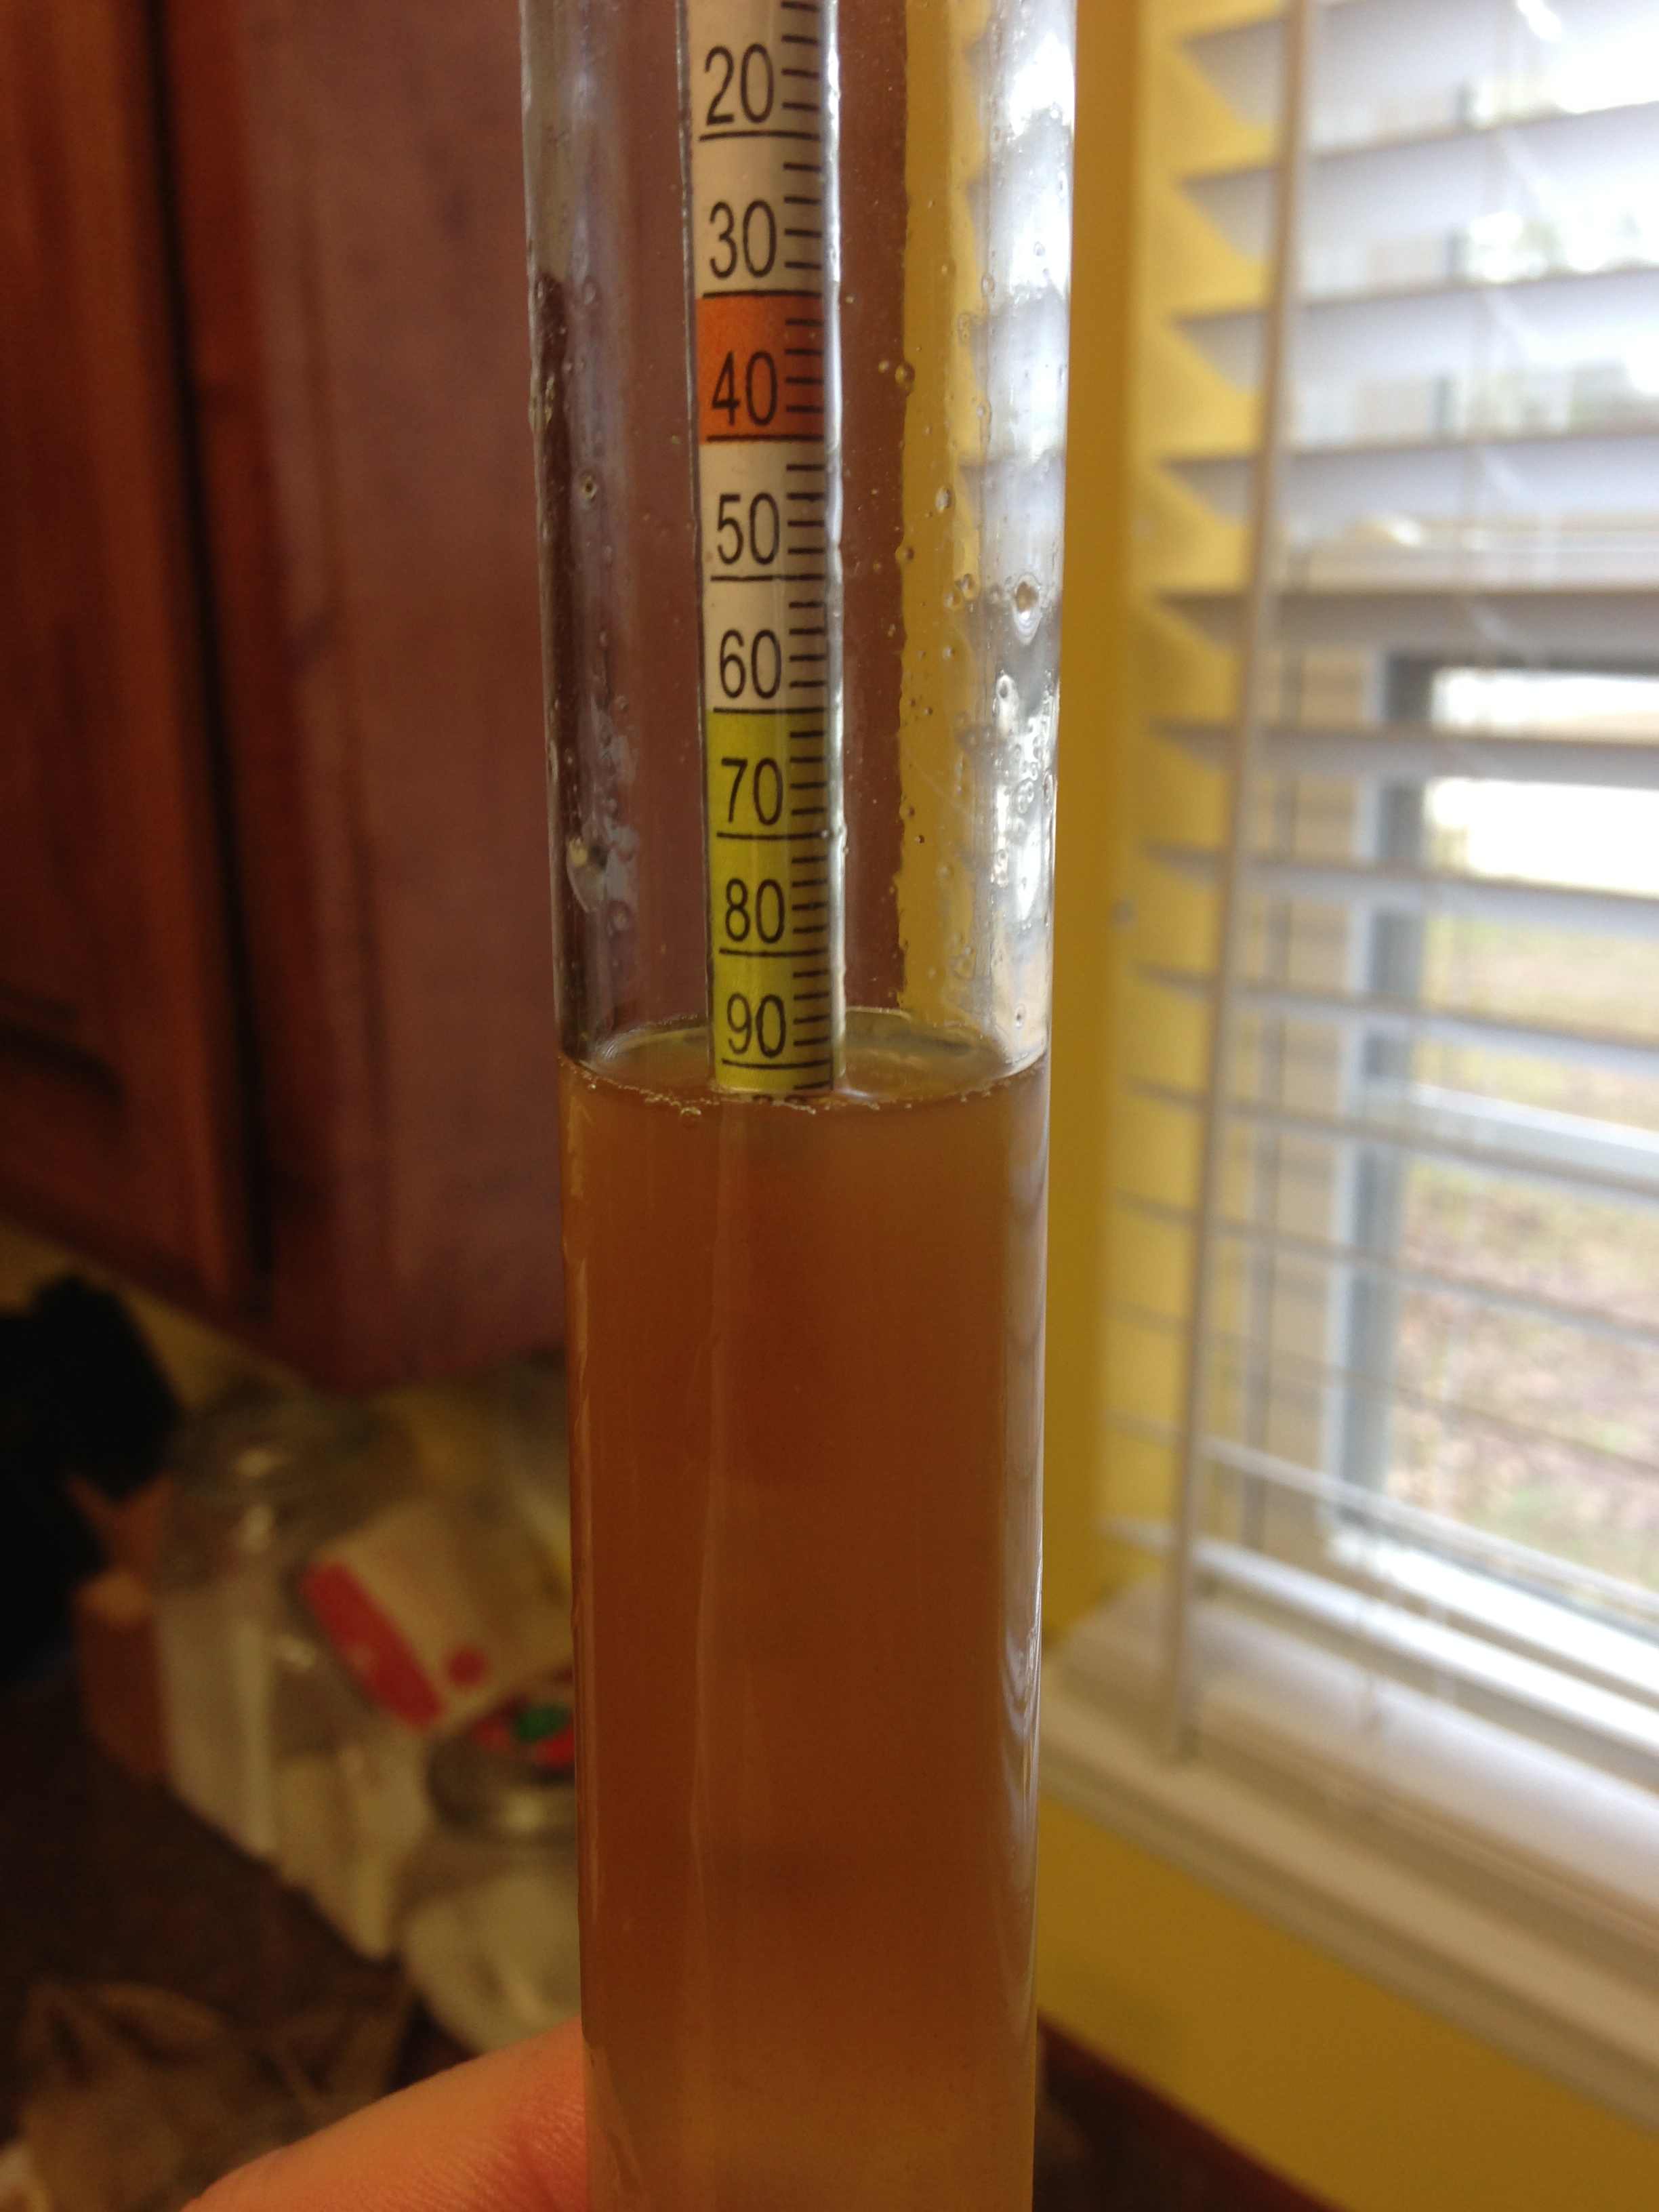 Take a quick hydrometer reading. Shows 1.091 which means could obtain 10.35 ABV but no less than 9.2 ABV